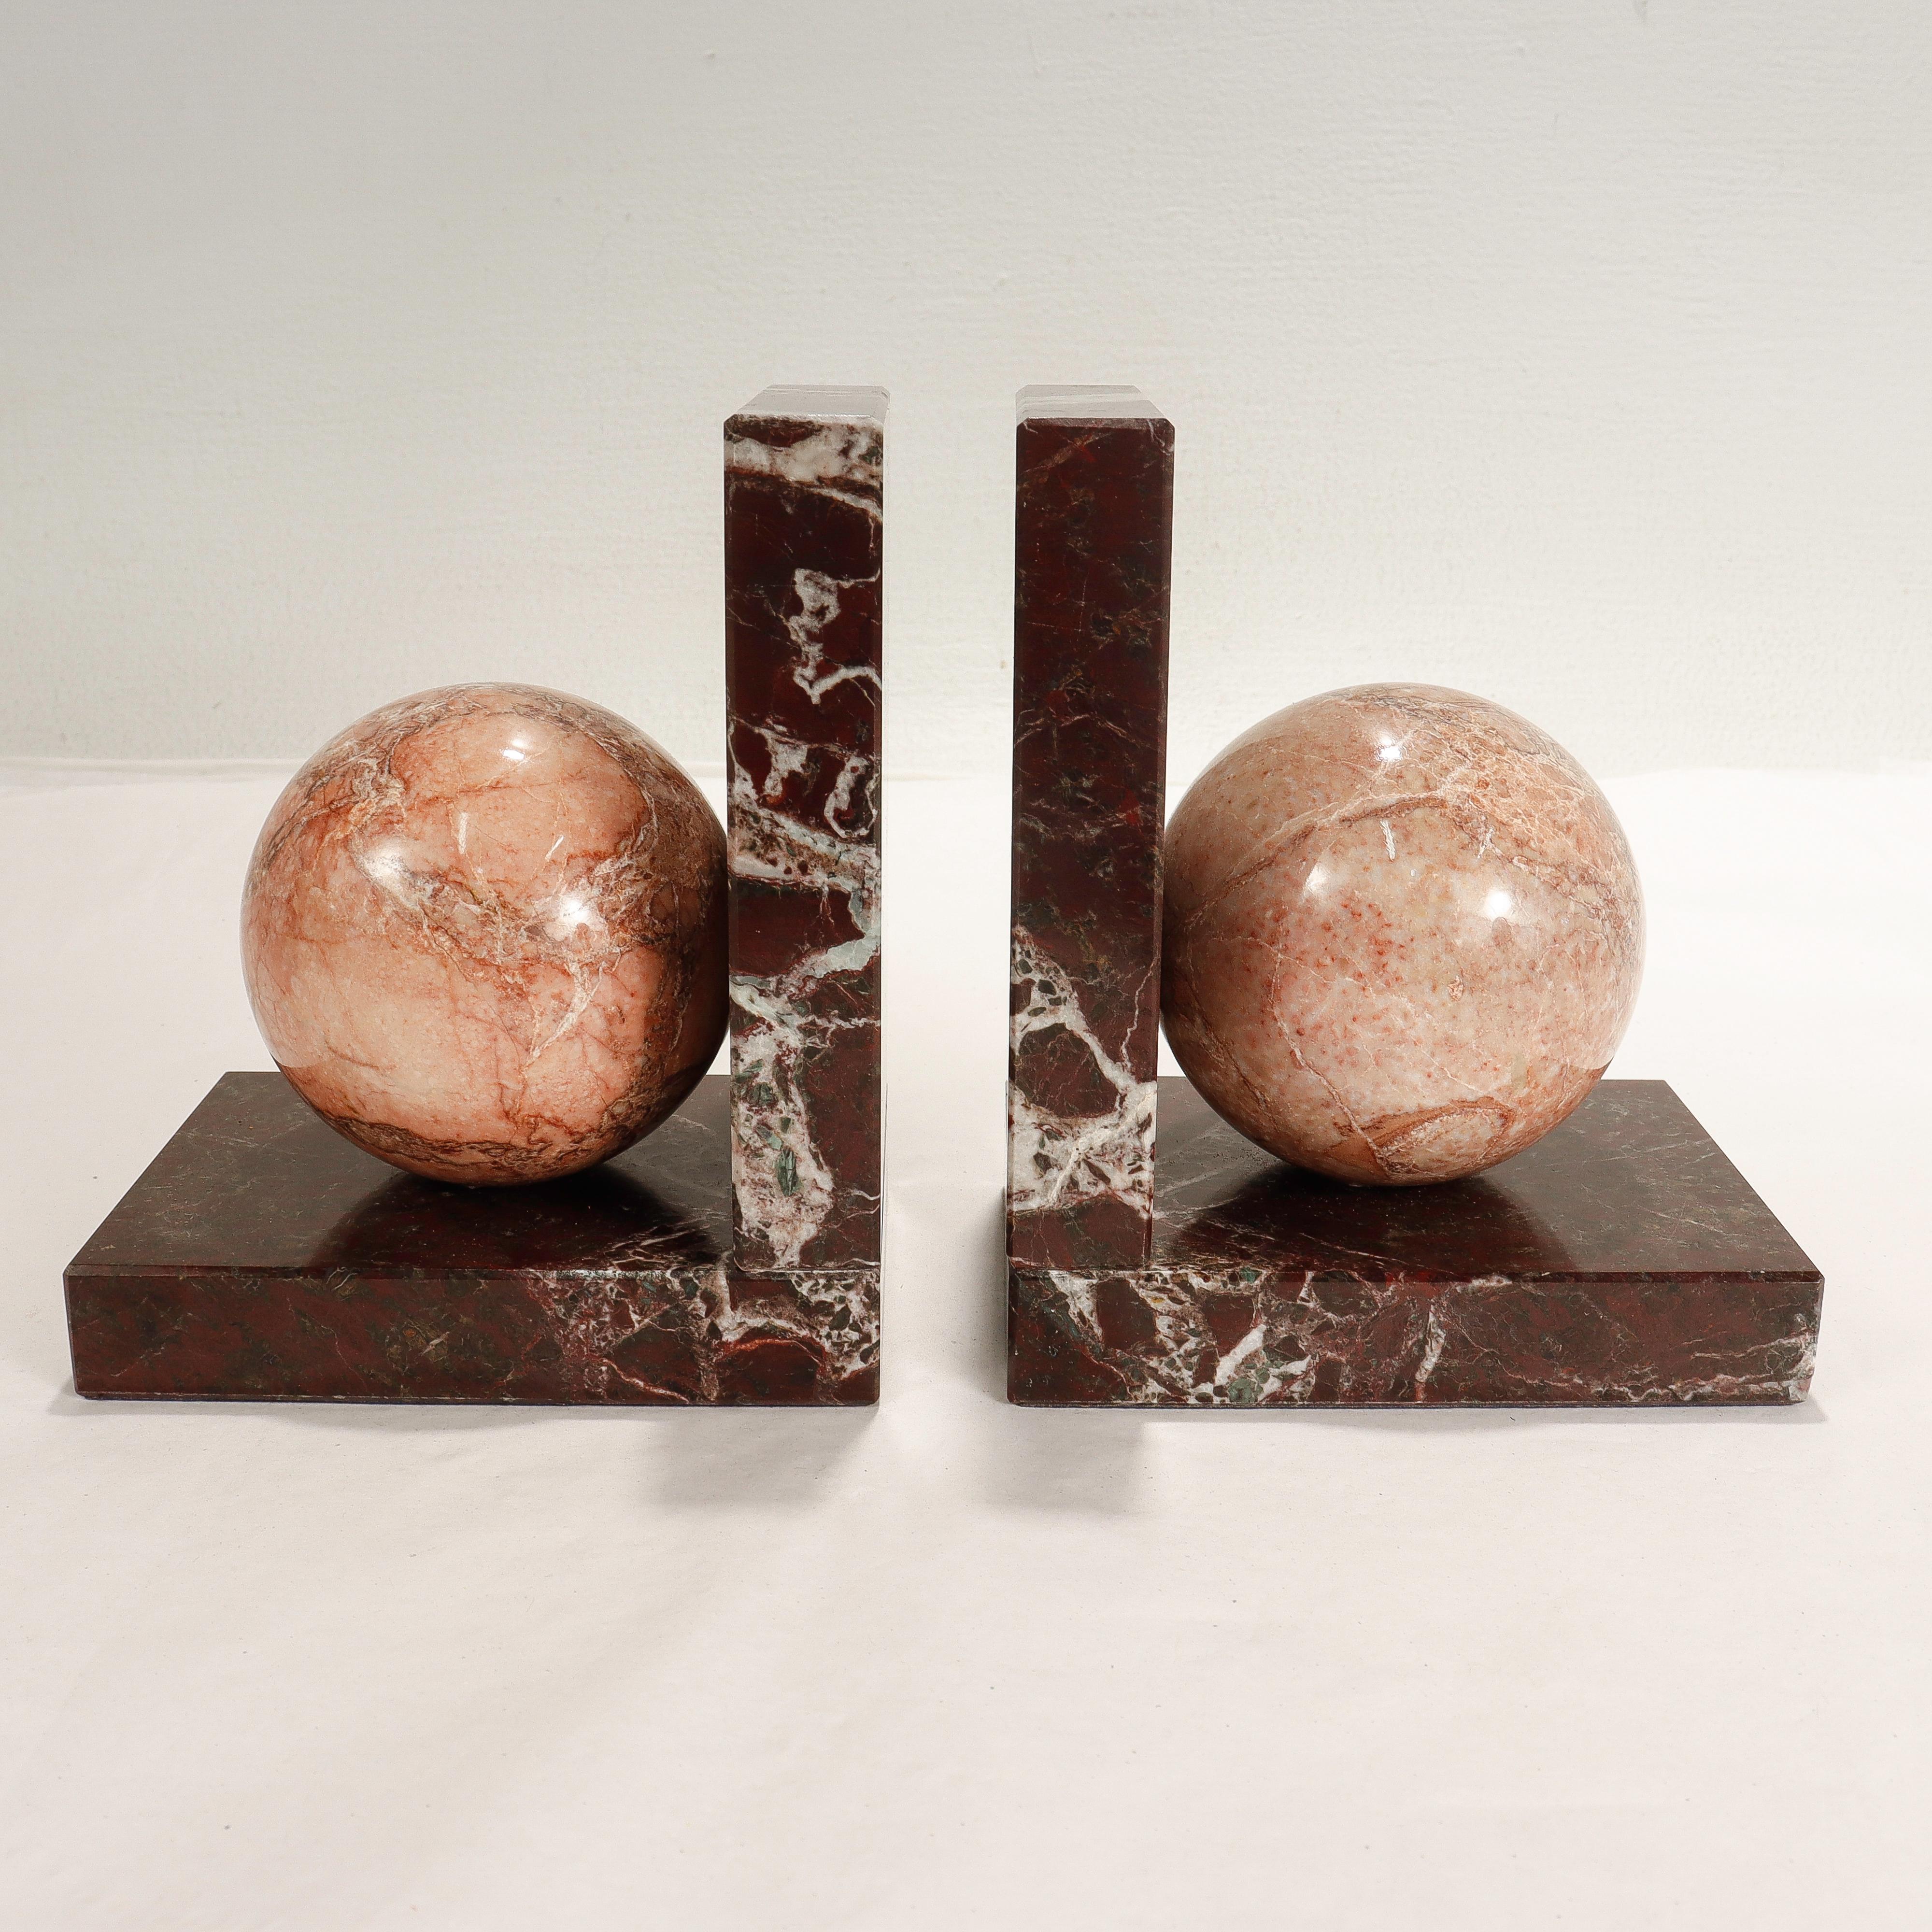 A fine pair of Italian marble bookends.

With burgundy & pink marble varieties.

With an R. Romanelli label to the base along with felt pads.

Simply a wonderful pair of bookends!

Date:
20th century

Overall condition:
They are in